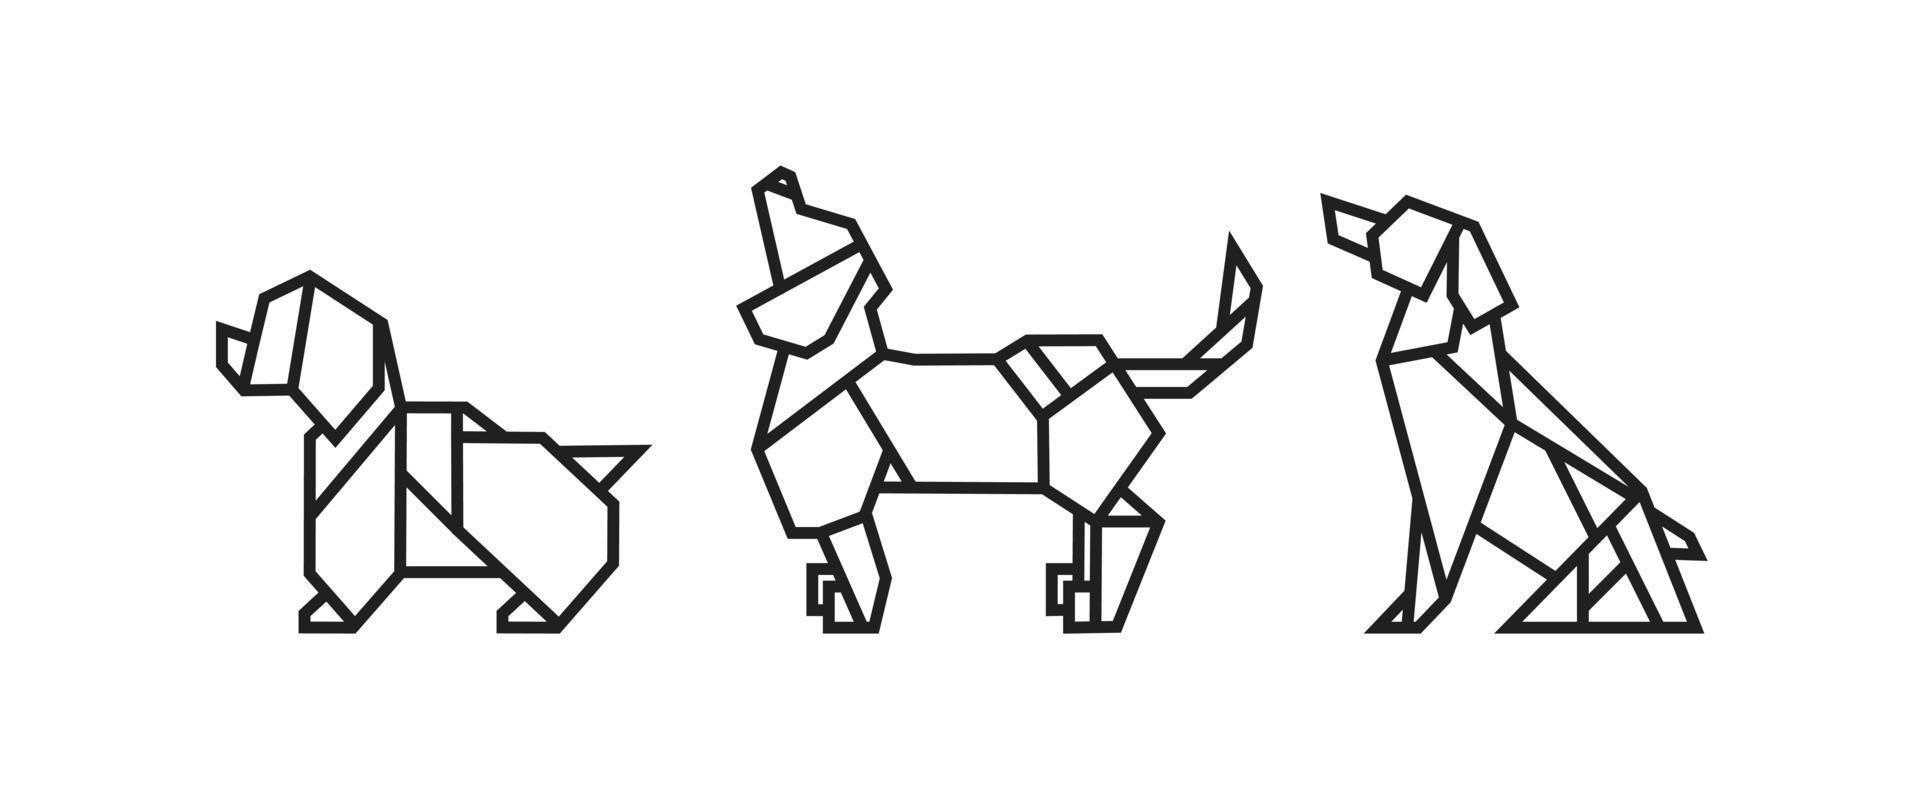 Dog illustrations in origami style vector